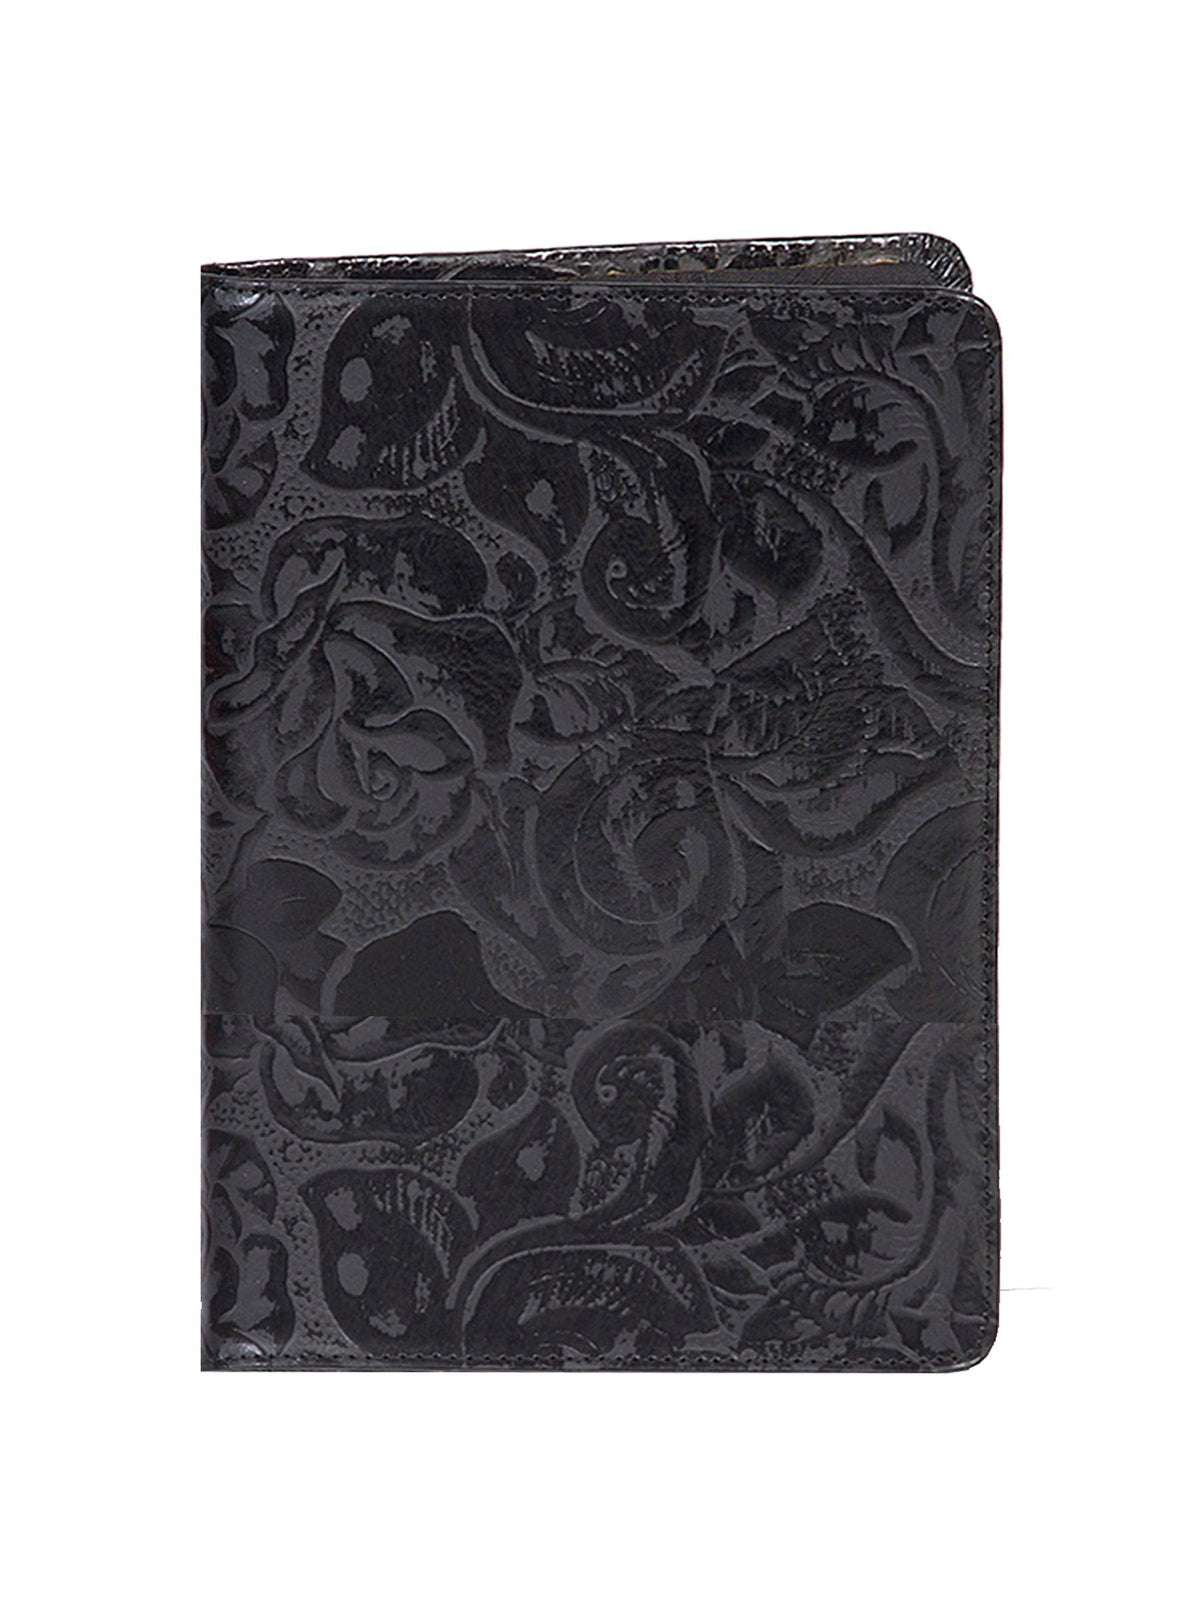 Scully Leather Black New Tooled Leather Blank Manuscript - Flyclothing LLC